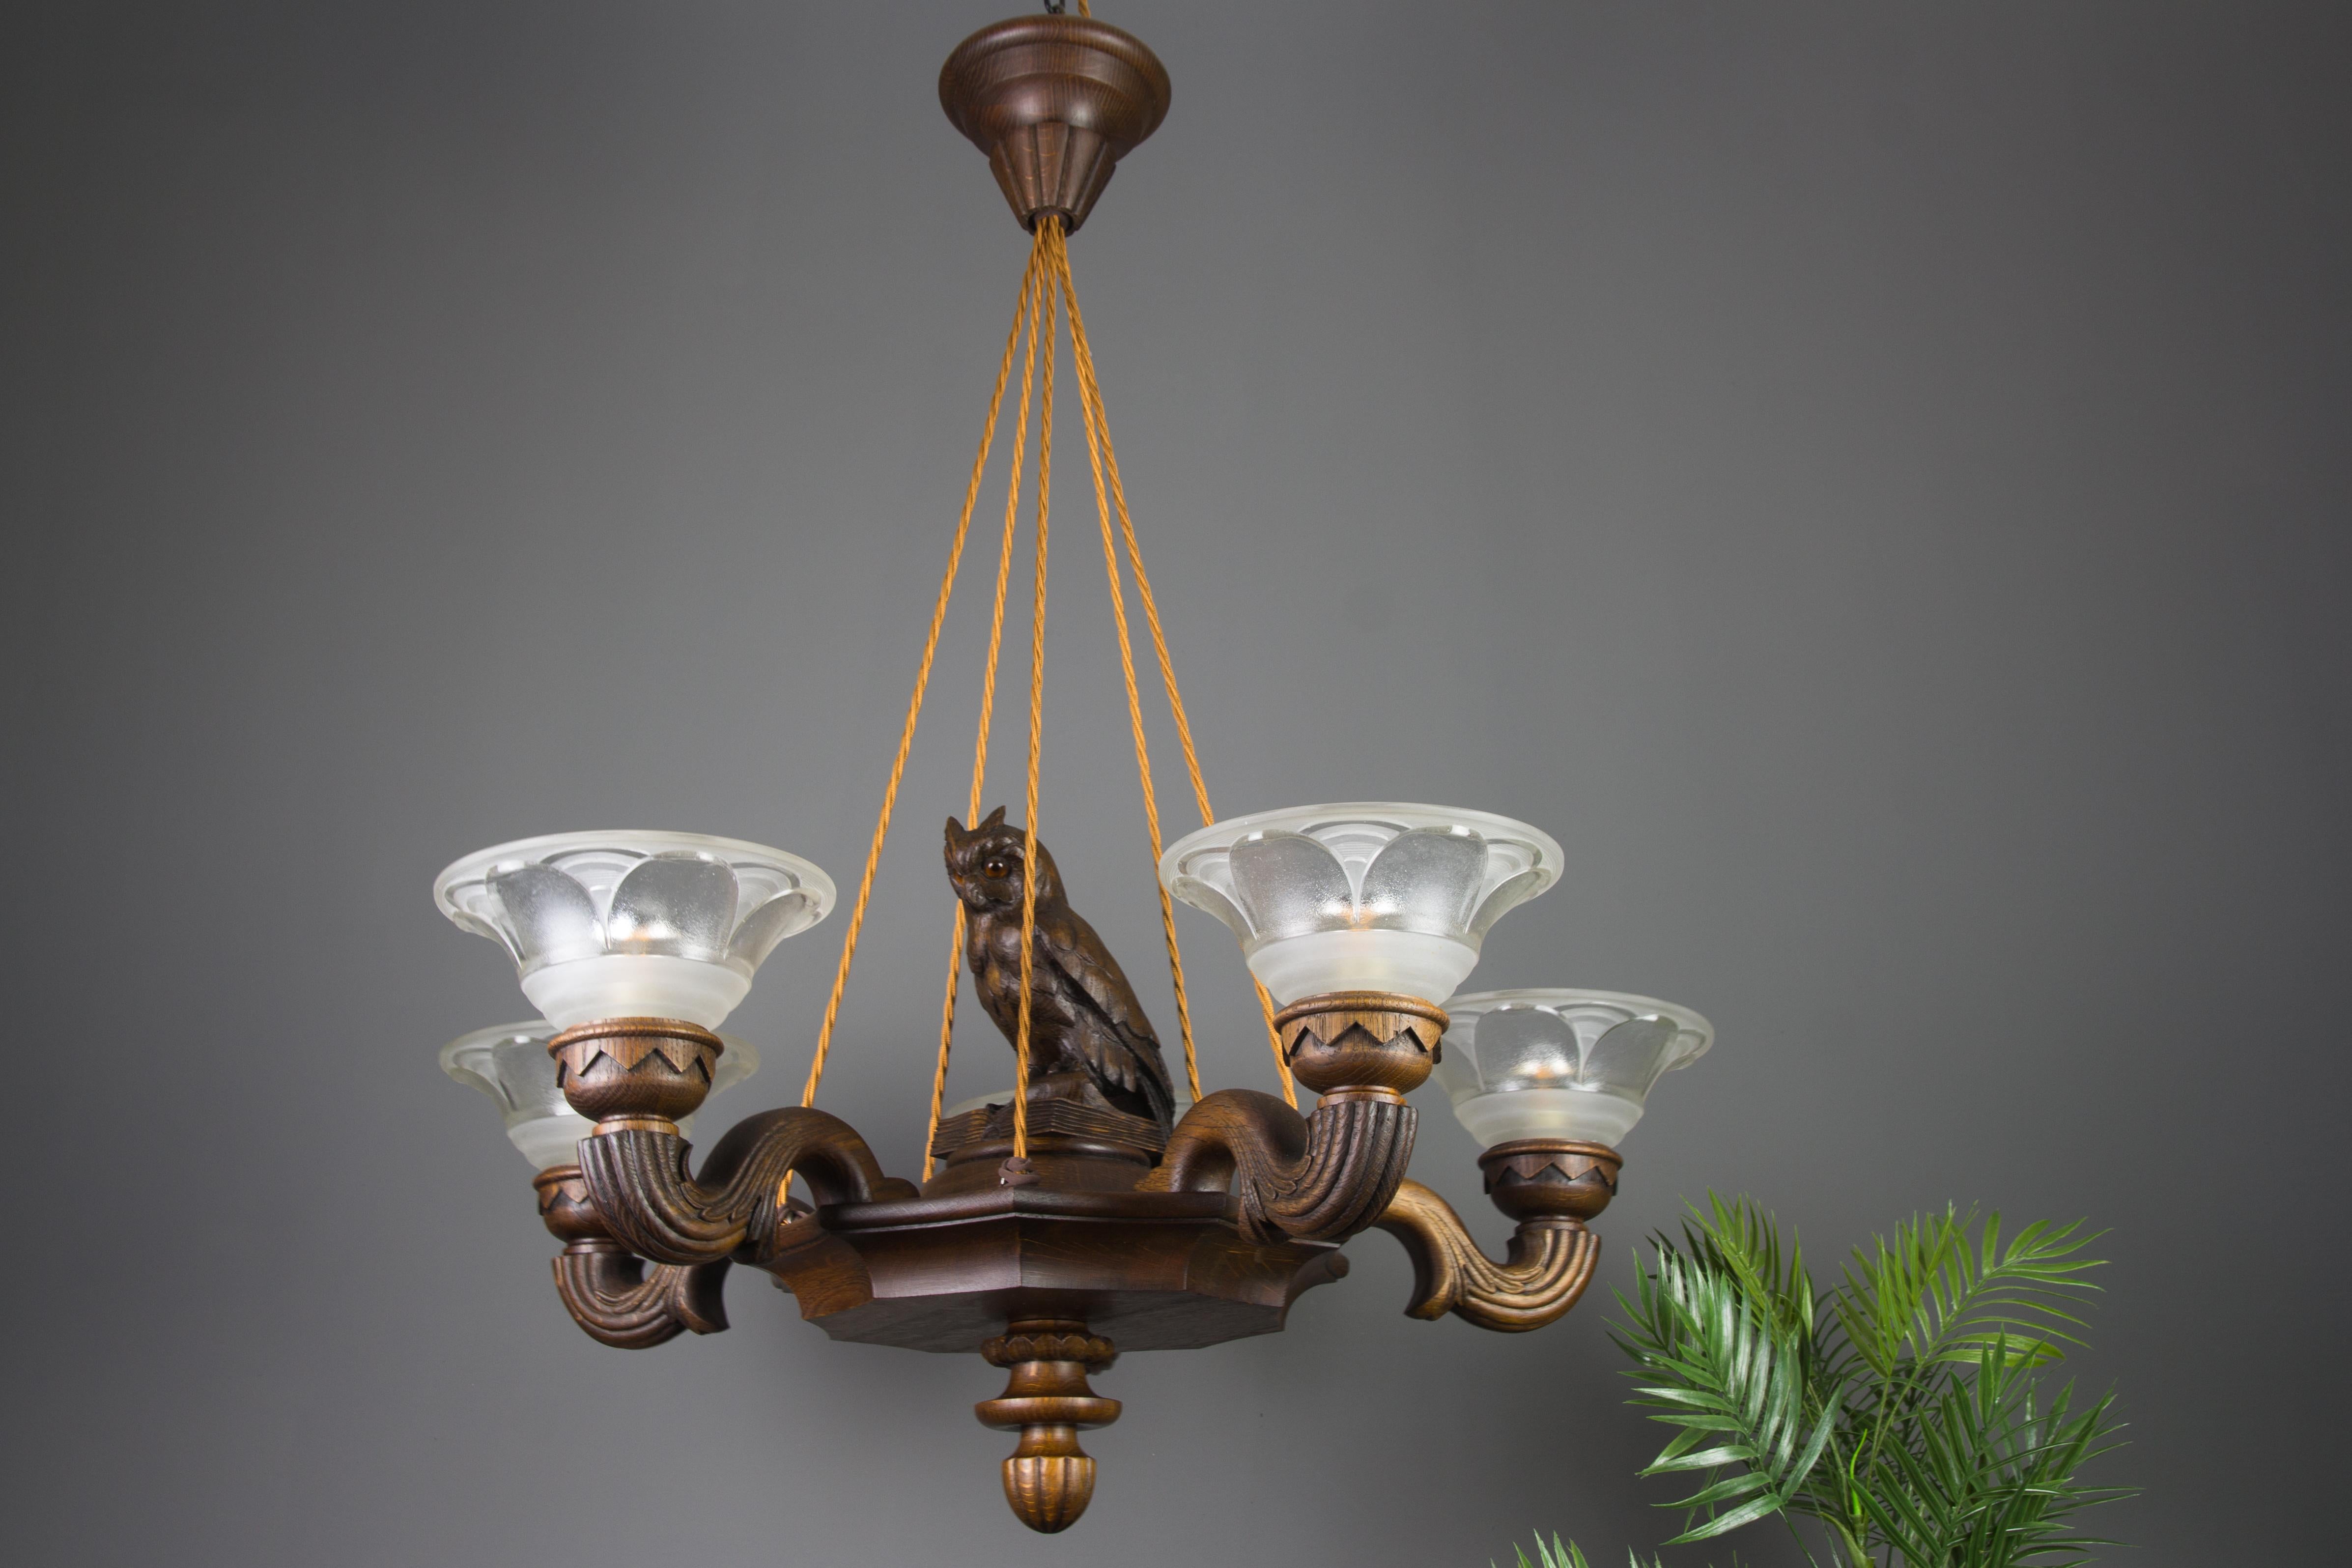 Hand-Carved Art Deco Carved Five-Light Chandelier with Owl Figure and Glass by Ezan, 1920s